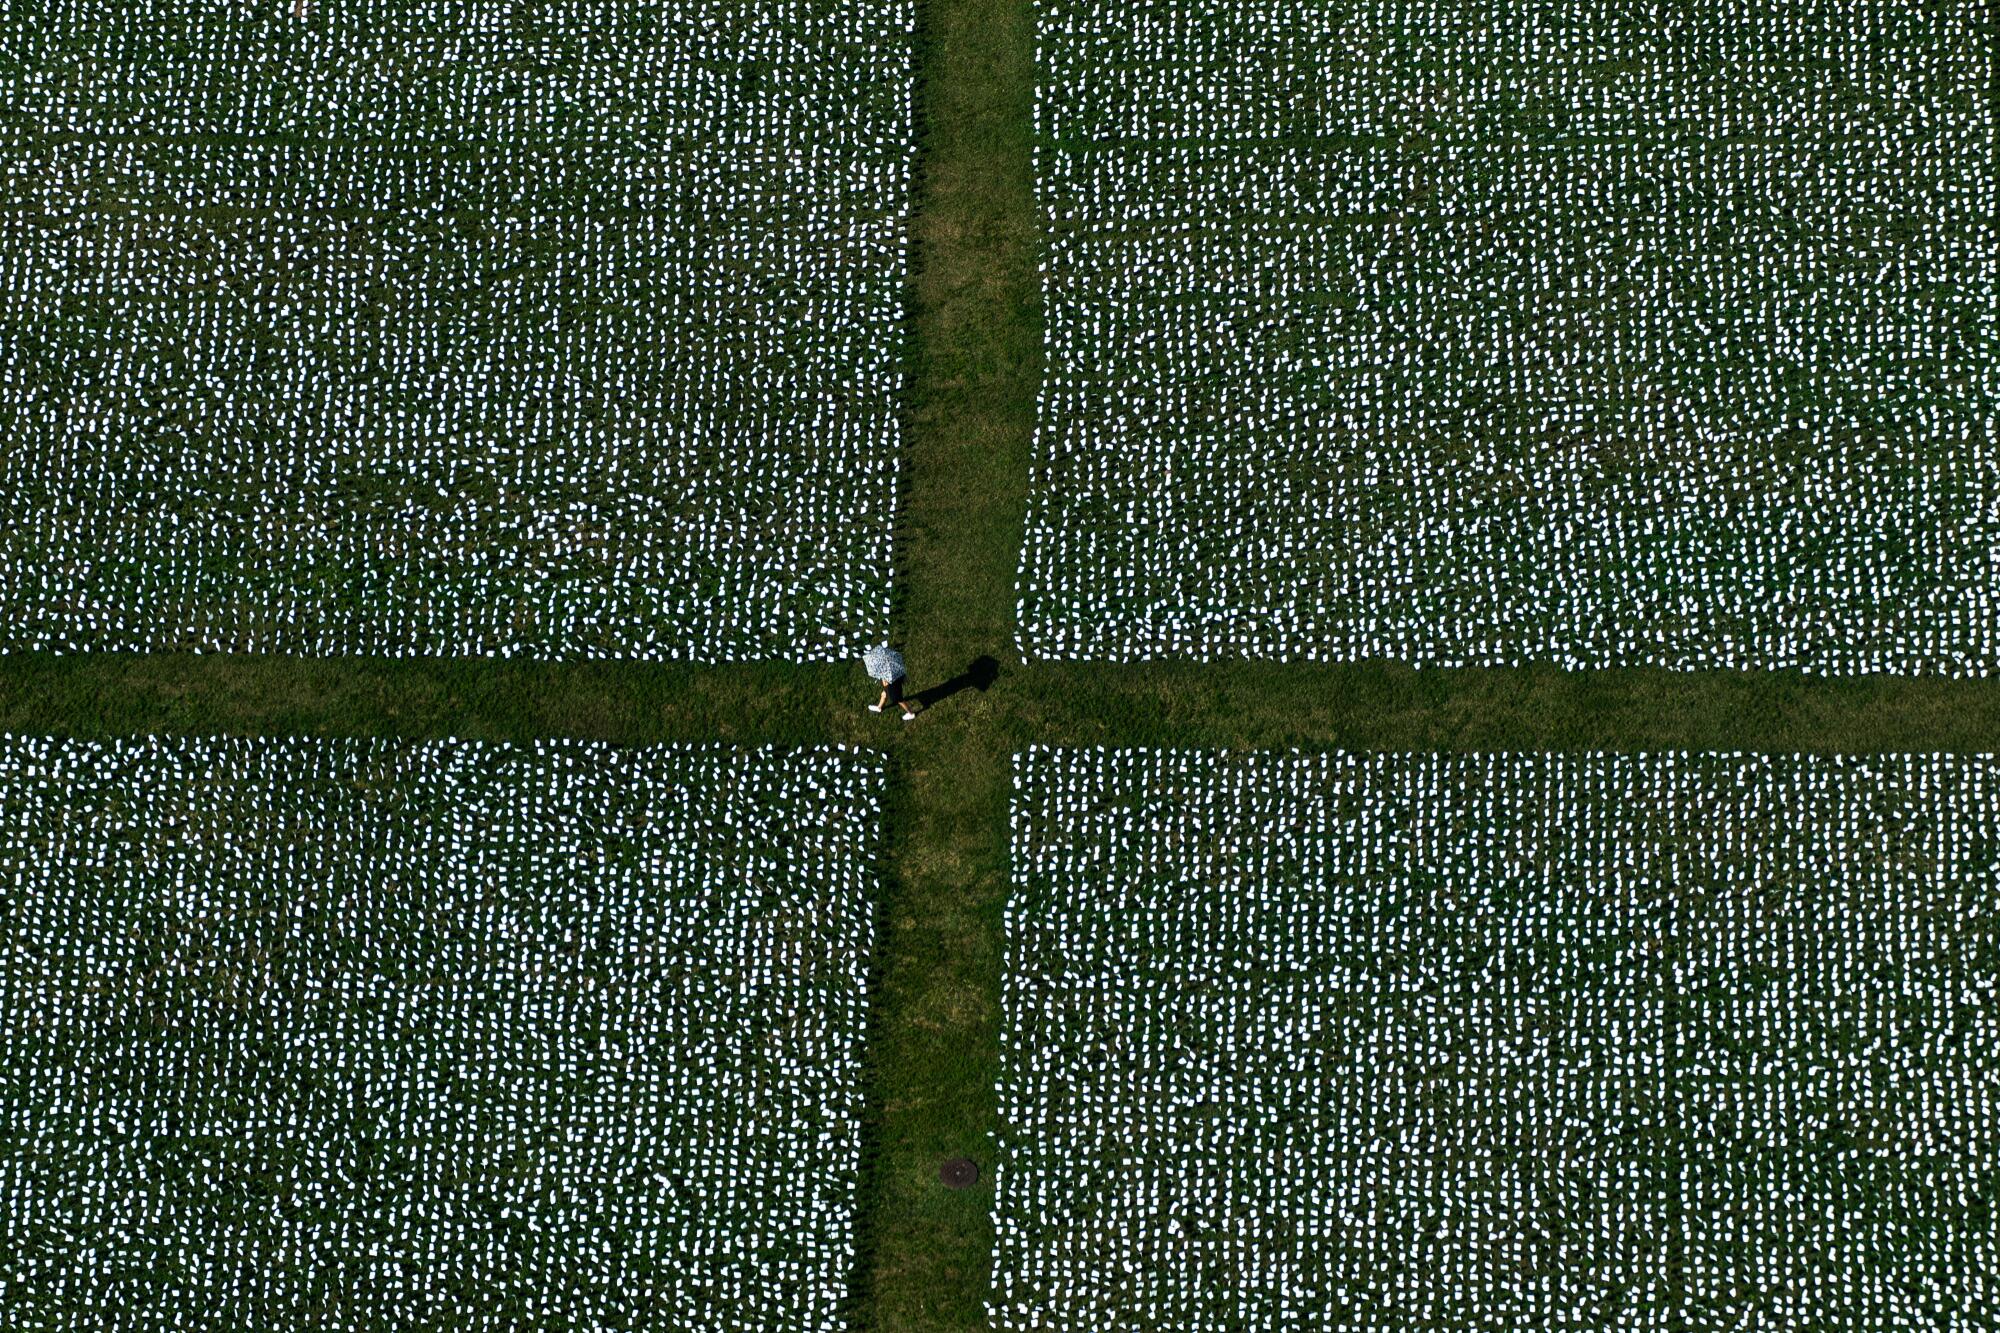 A person stands at the corner of four blocks of white flags in the grass, seen from above